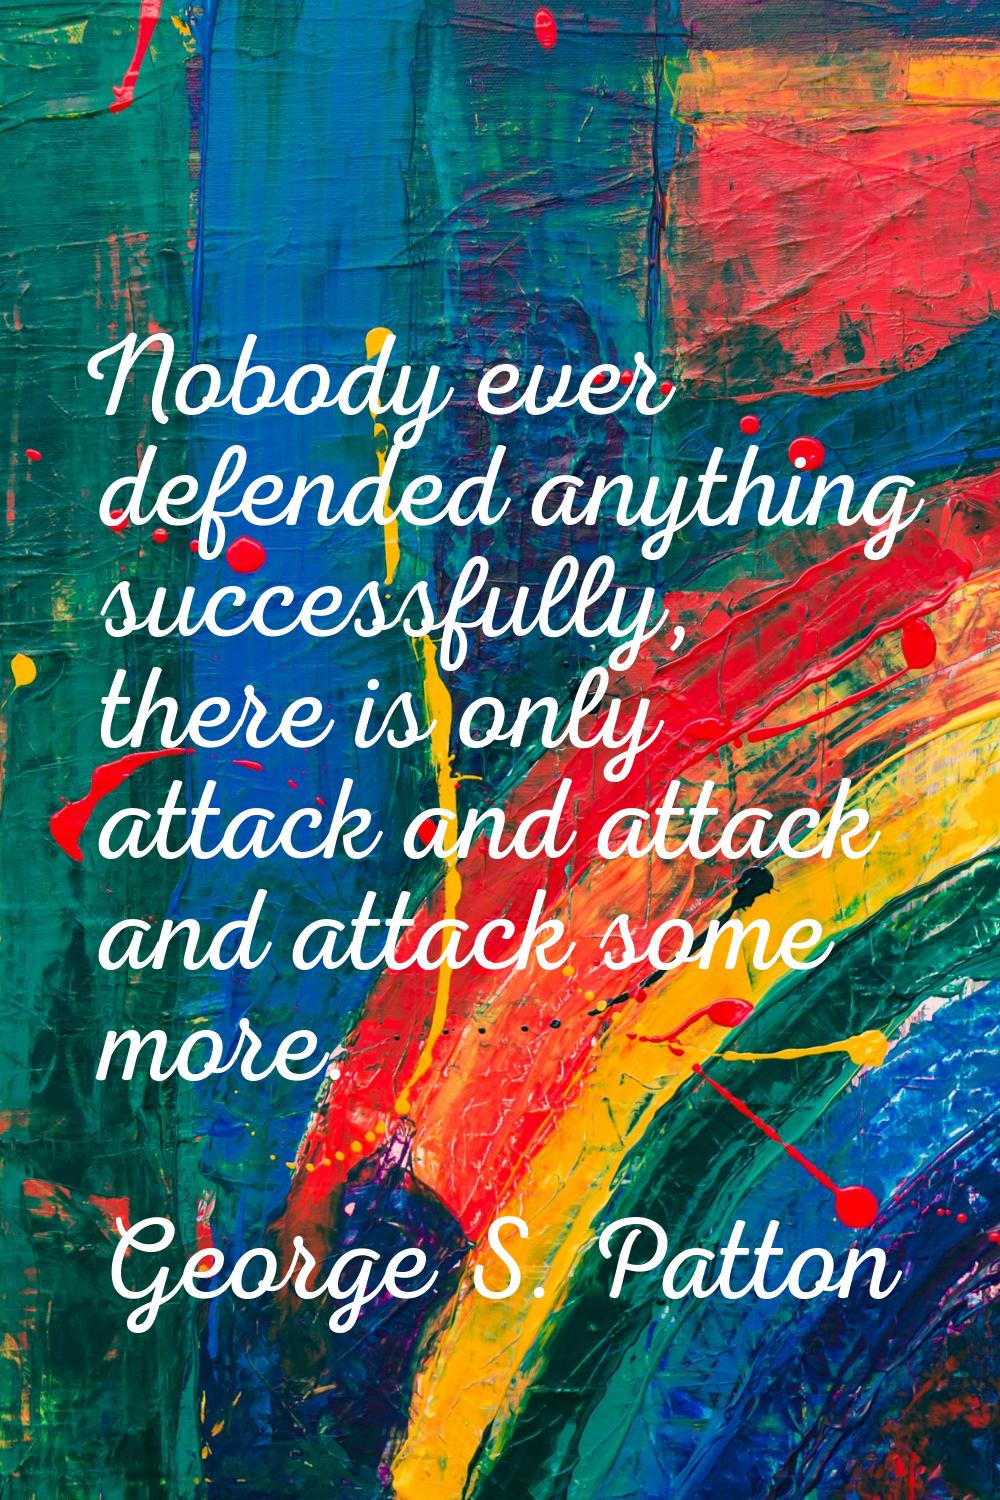 Nobody ever defended anything successfully, there is only attack and attack and attack some more.